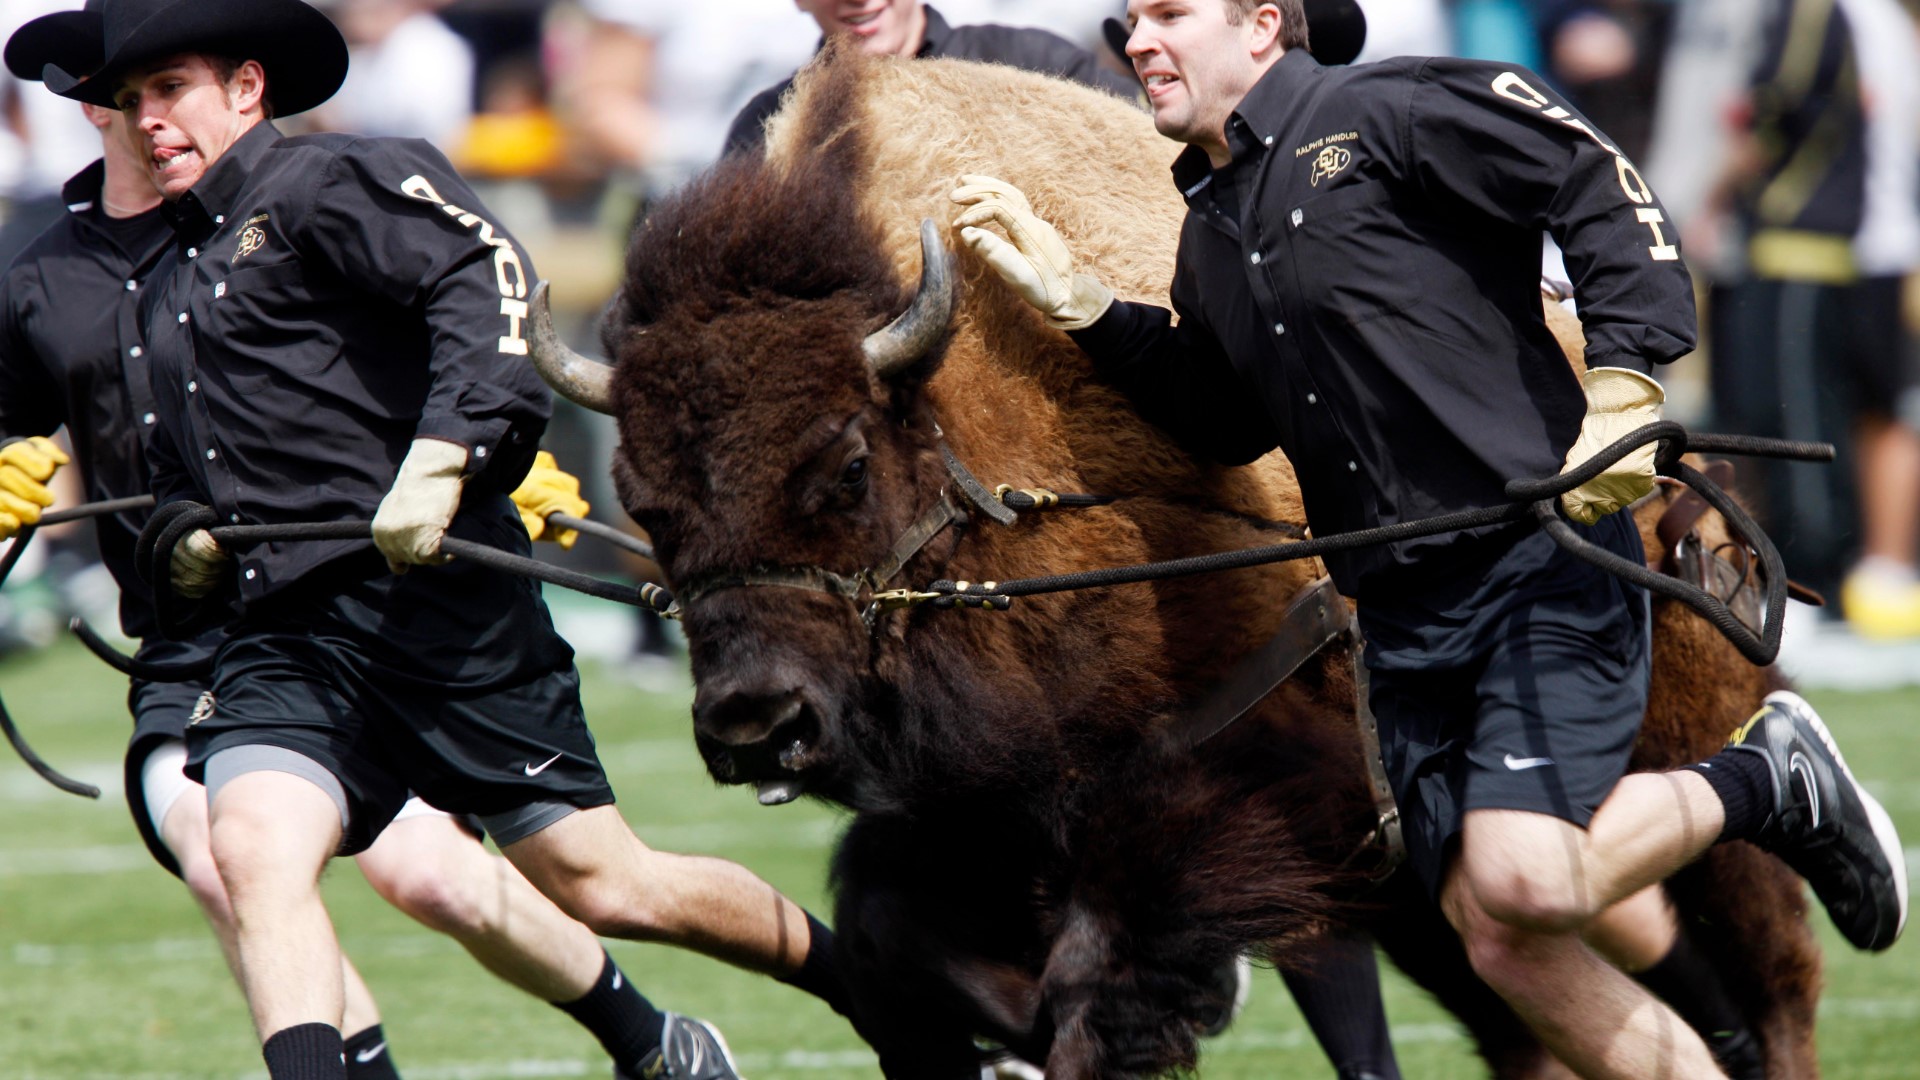 Ralphie VI, the newest live Buffalo for CU, runs for the first time on Sept. 3, 2021.